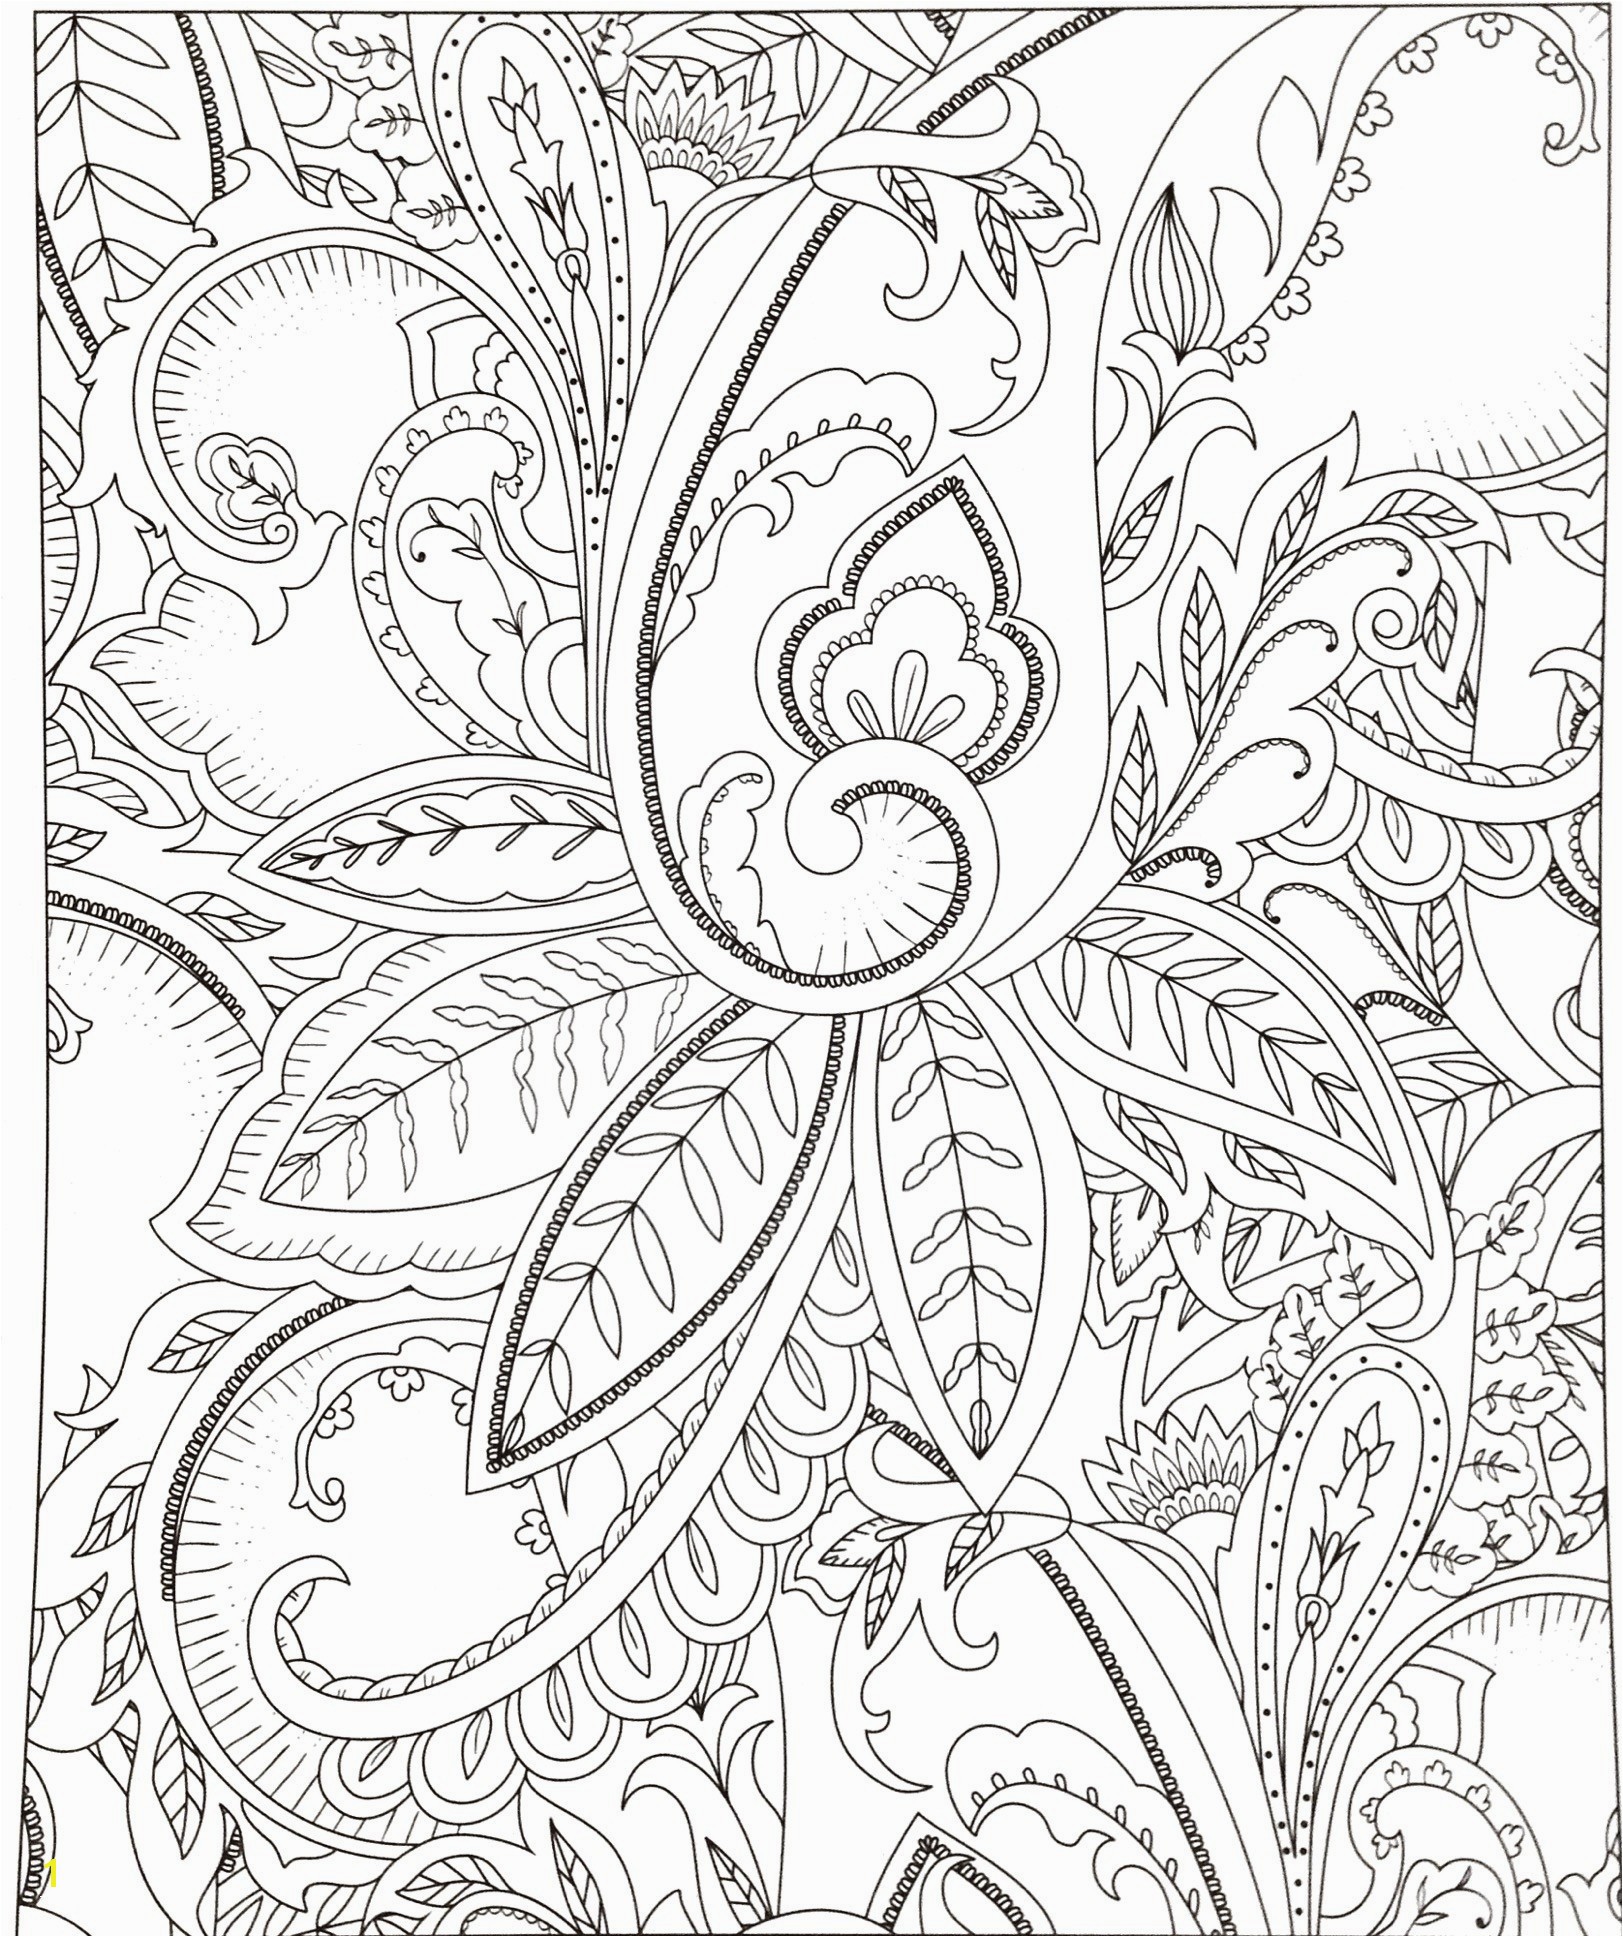 Plant Coloring Pages for Preschoolers Detailed Coloring Pages for Kids Coloring Pages for Kides Elegant